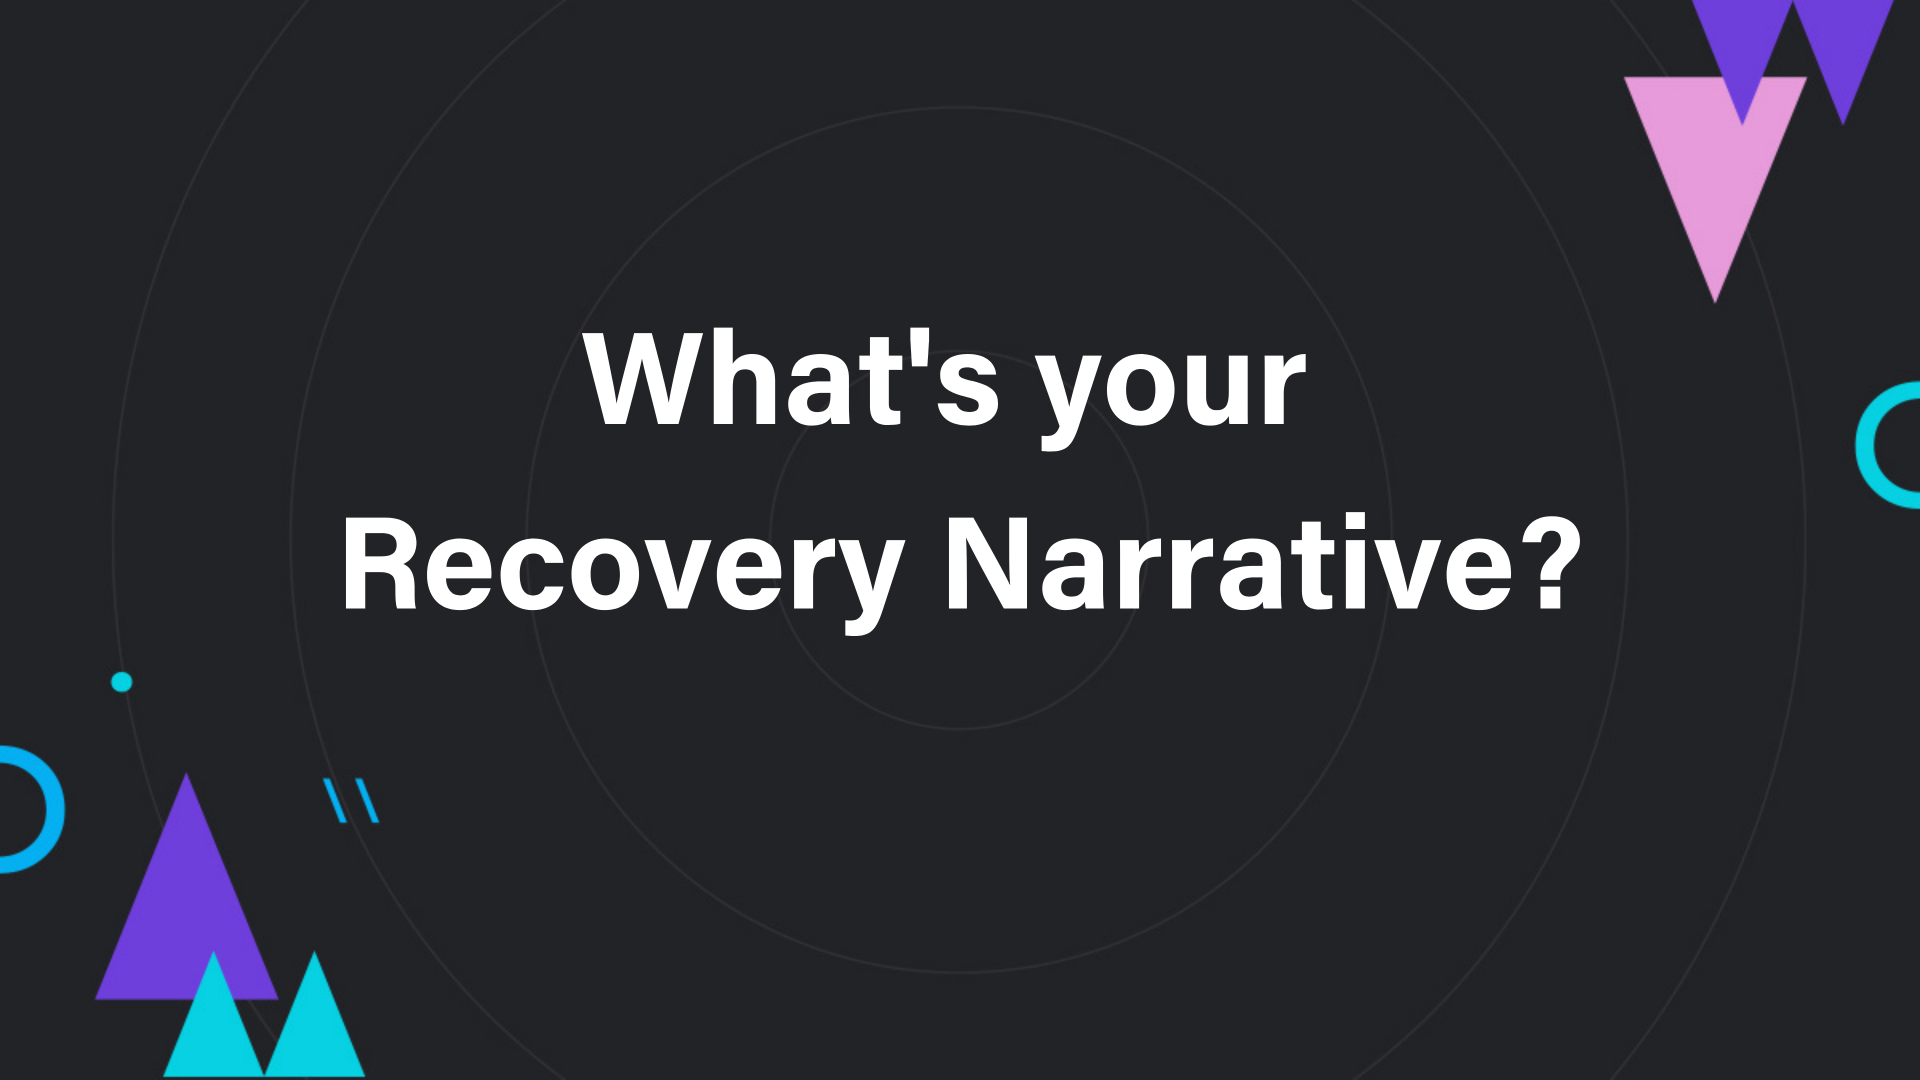 What's your recovery narrative?